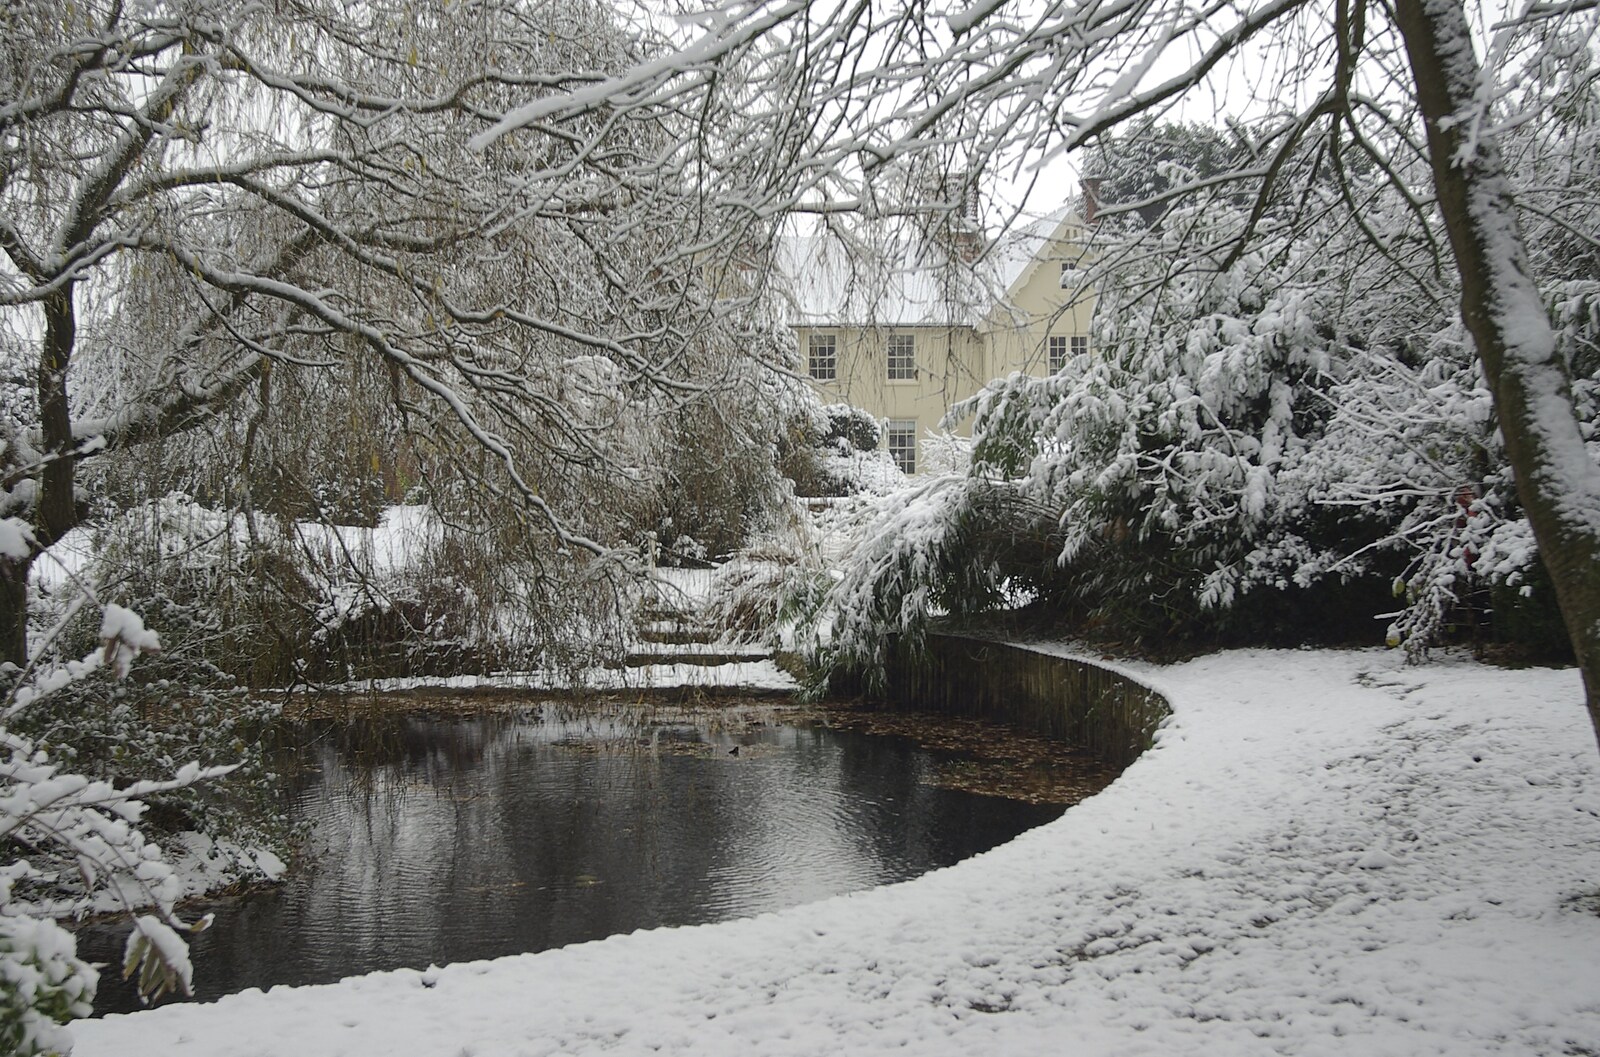 A picturesque scene from the gardens of the Cornwallis Hotel from Snow Days, Brome, Suffolk - 22nd November 2008